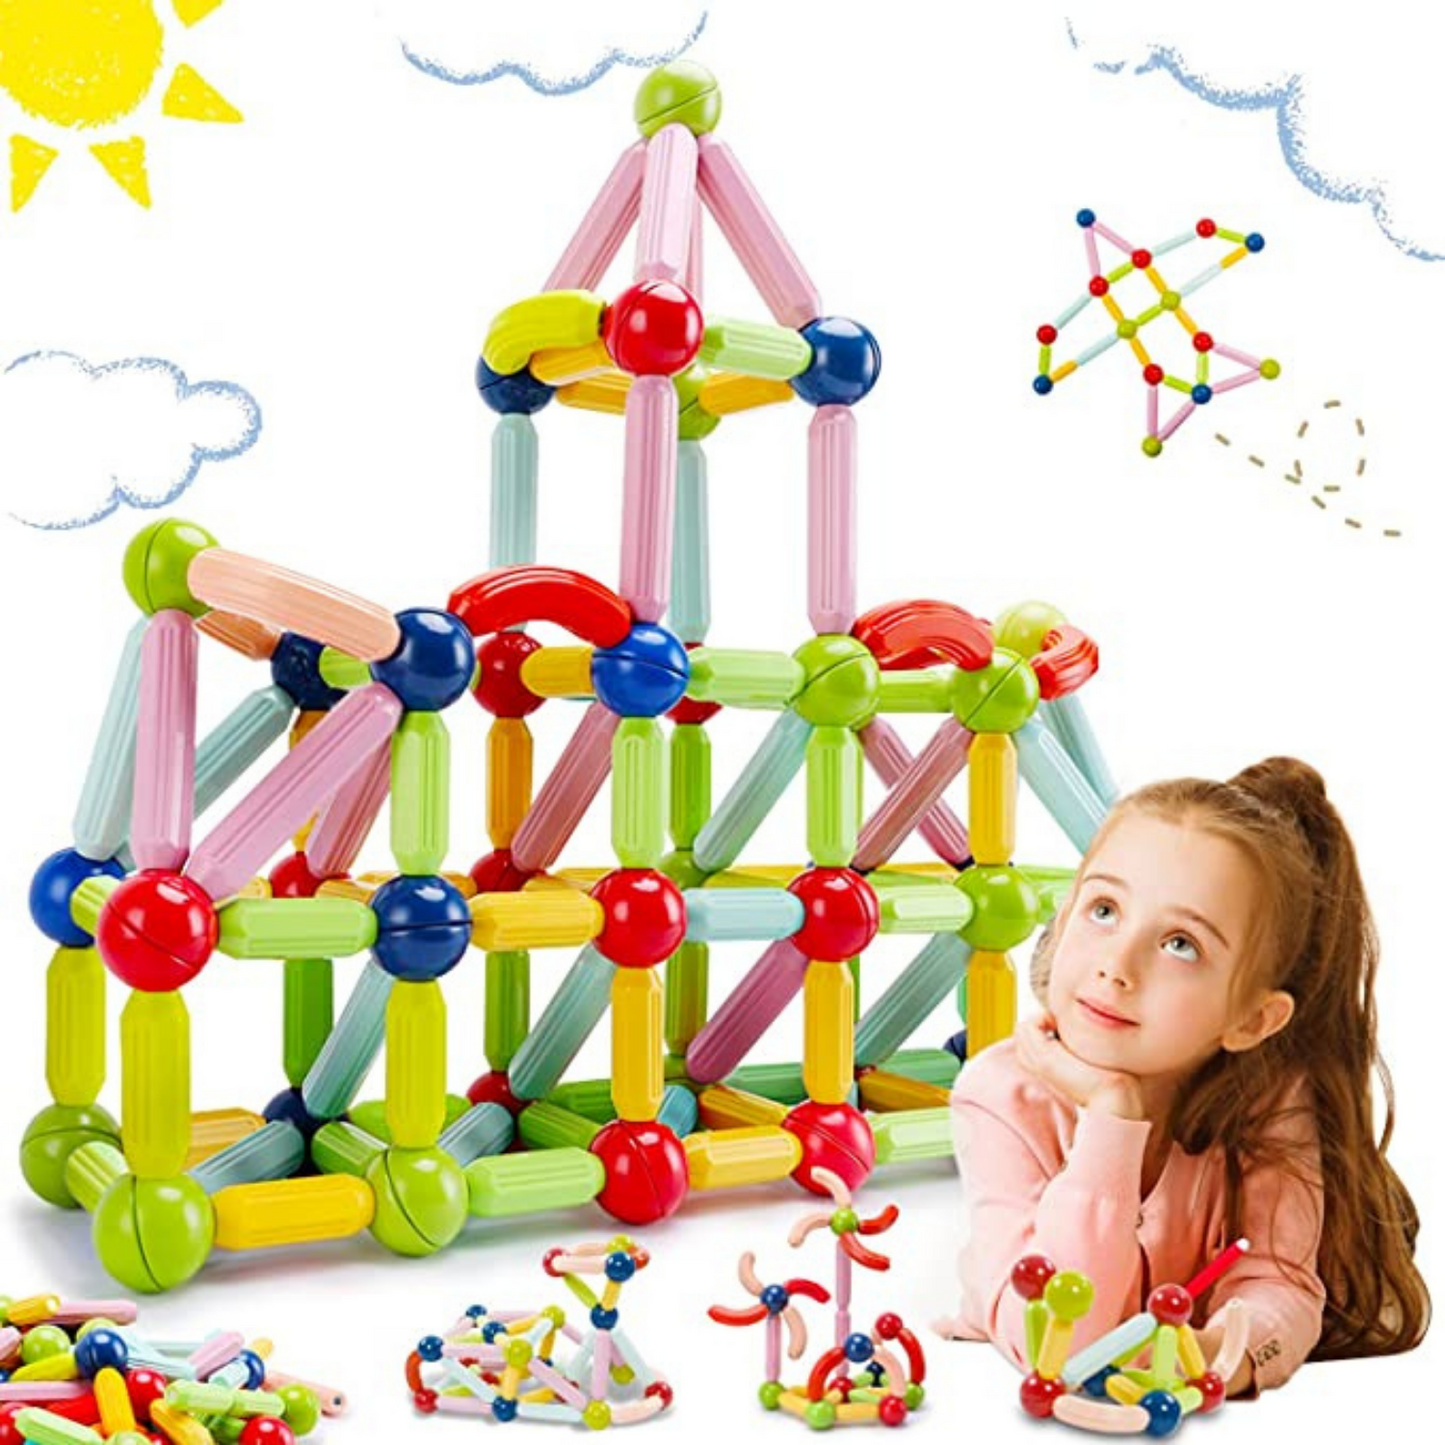 Groovd™ Magnetic Building Set